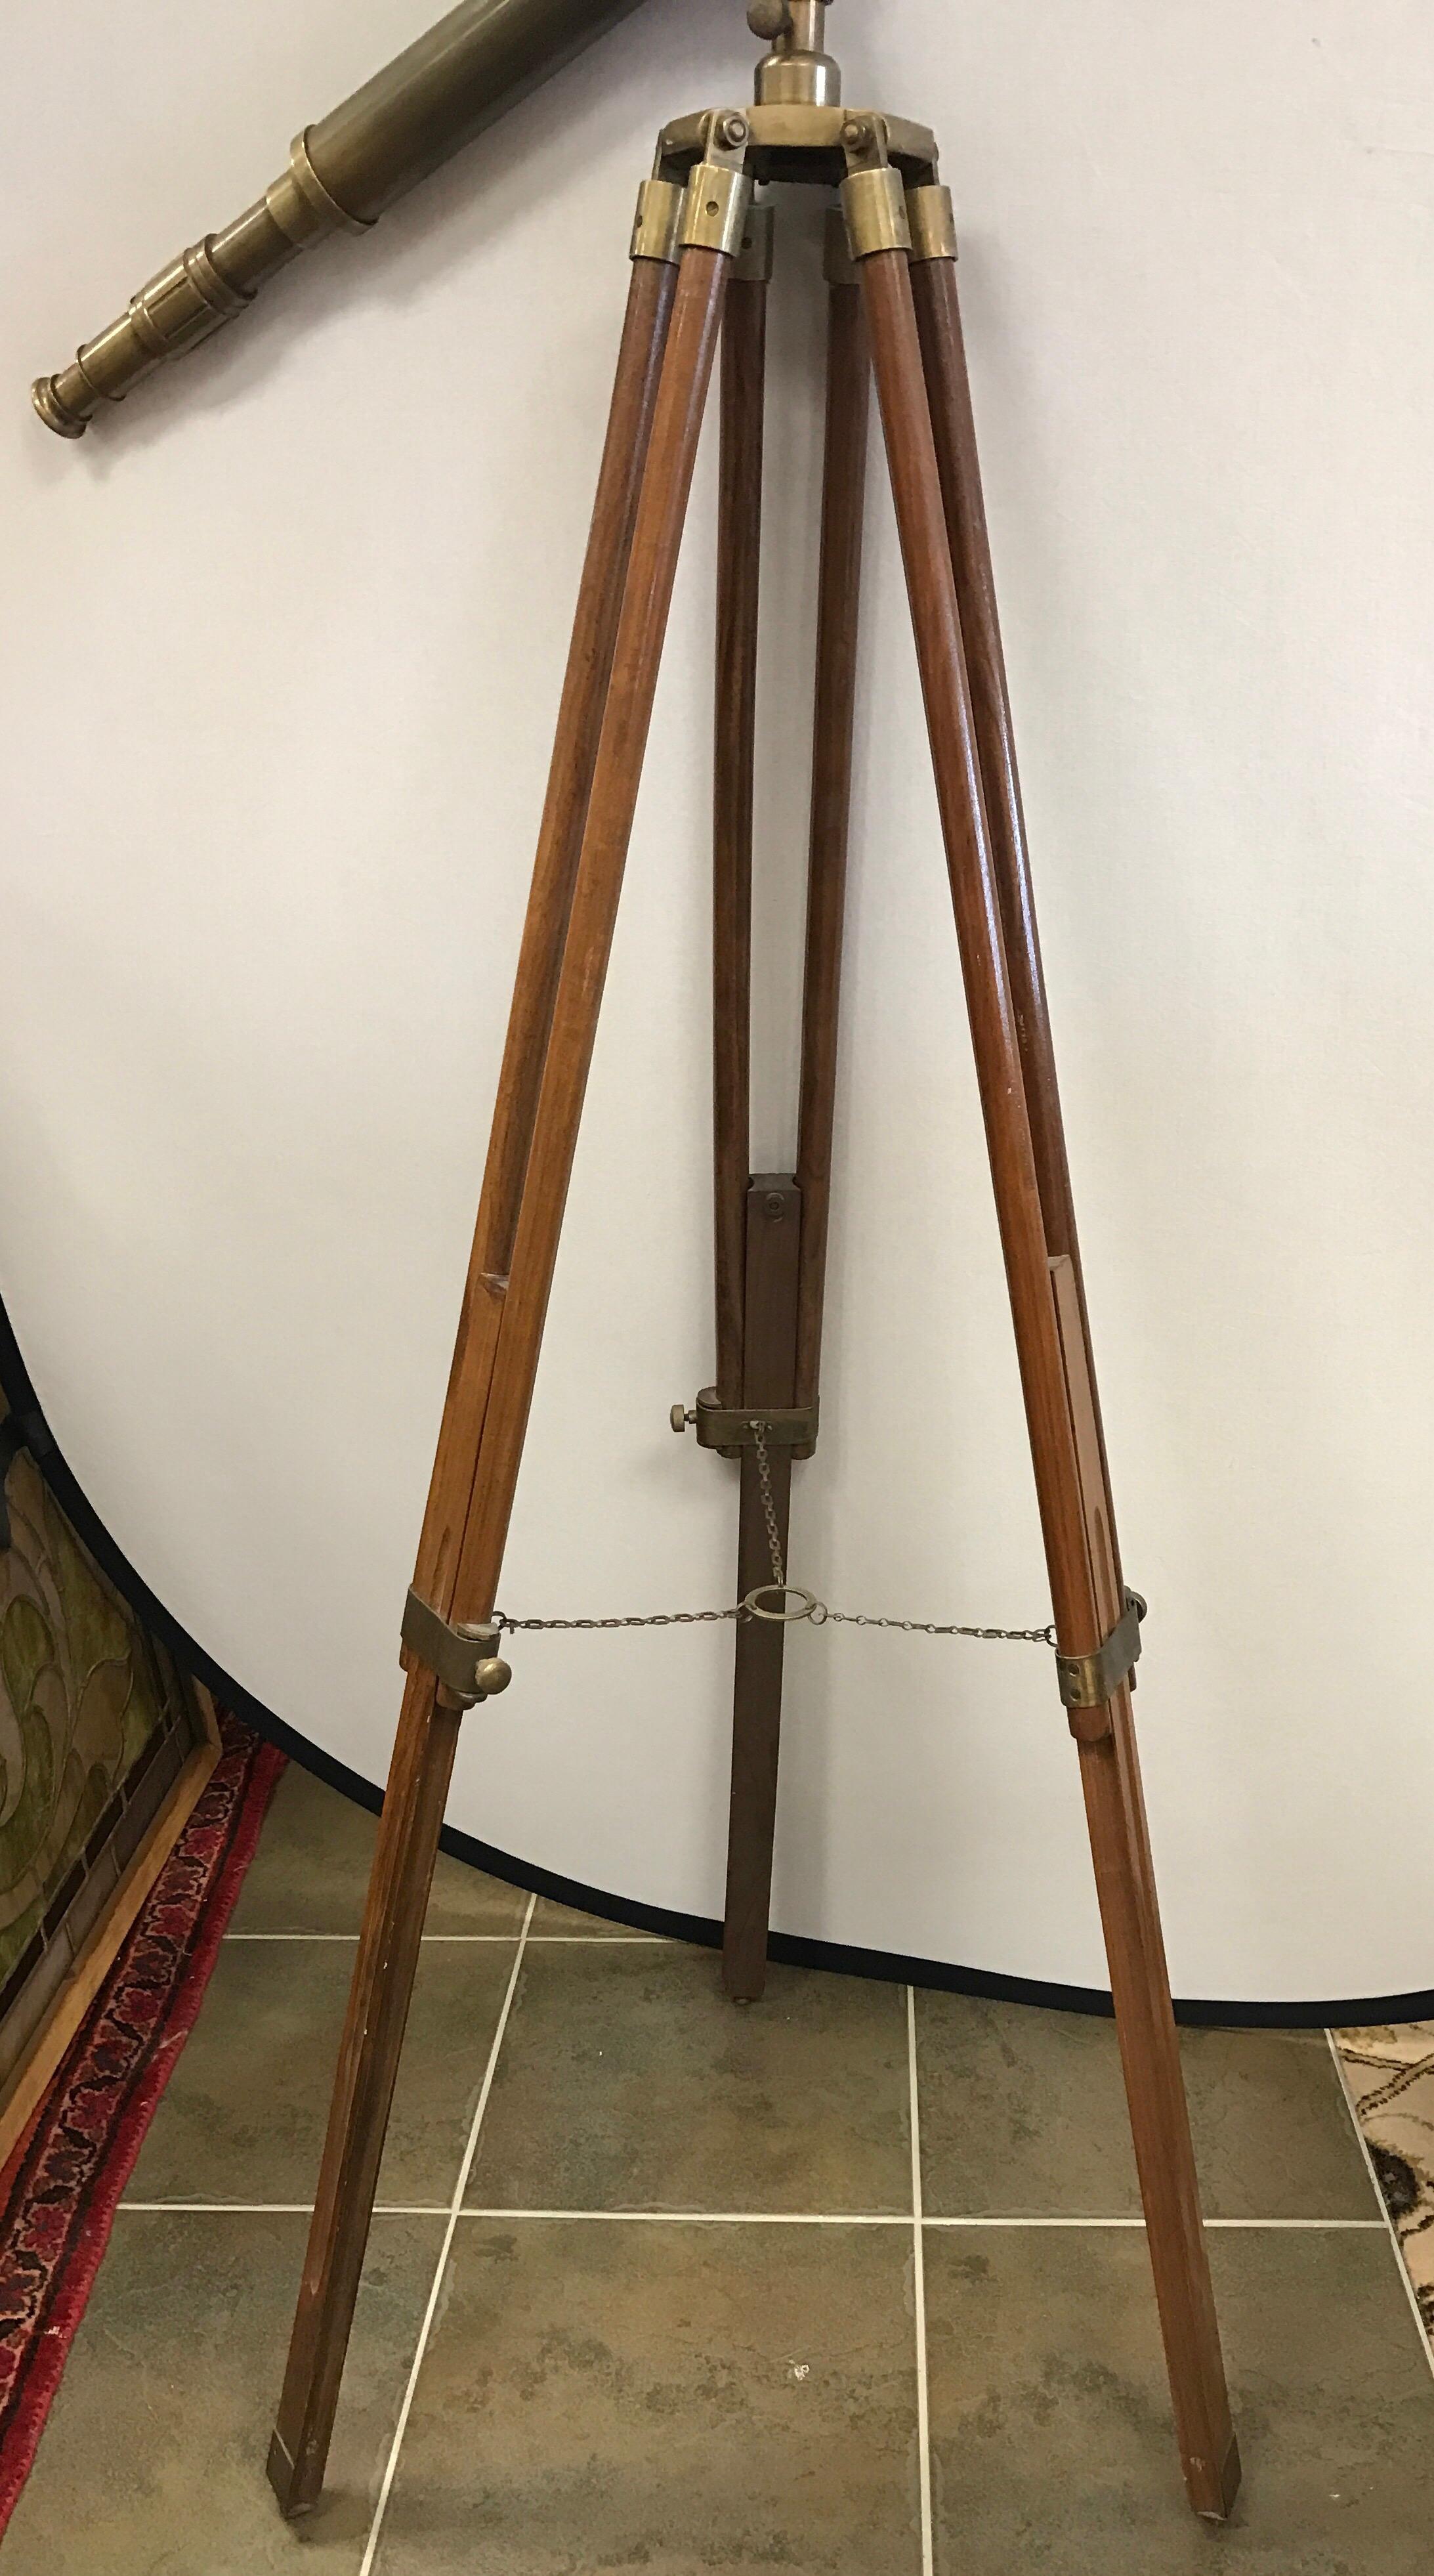 Antique brass telescope on standing tripod base in working condition.